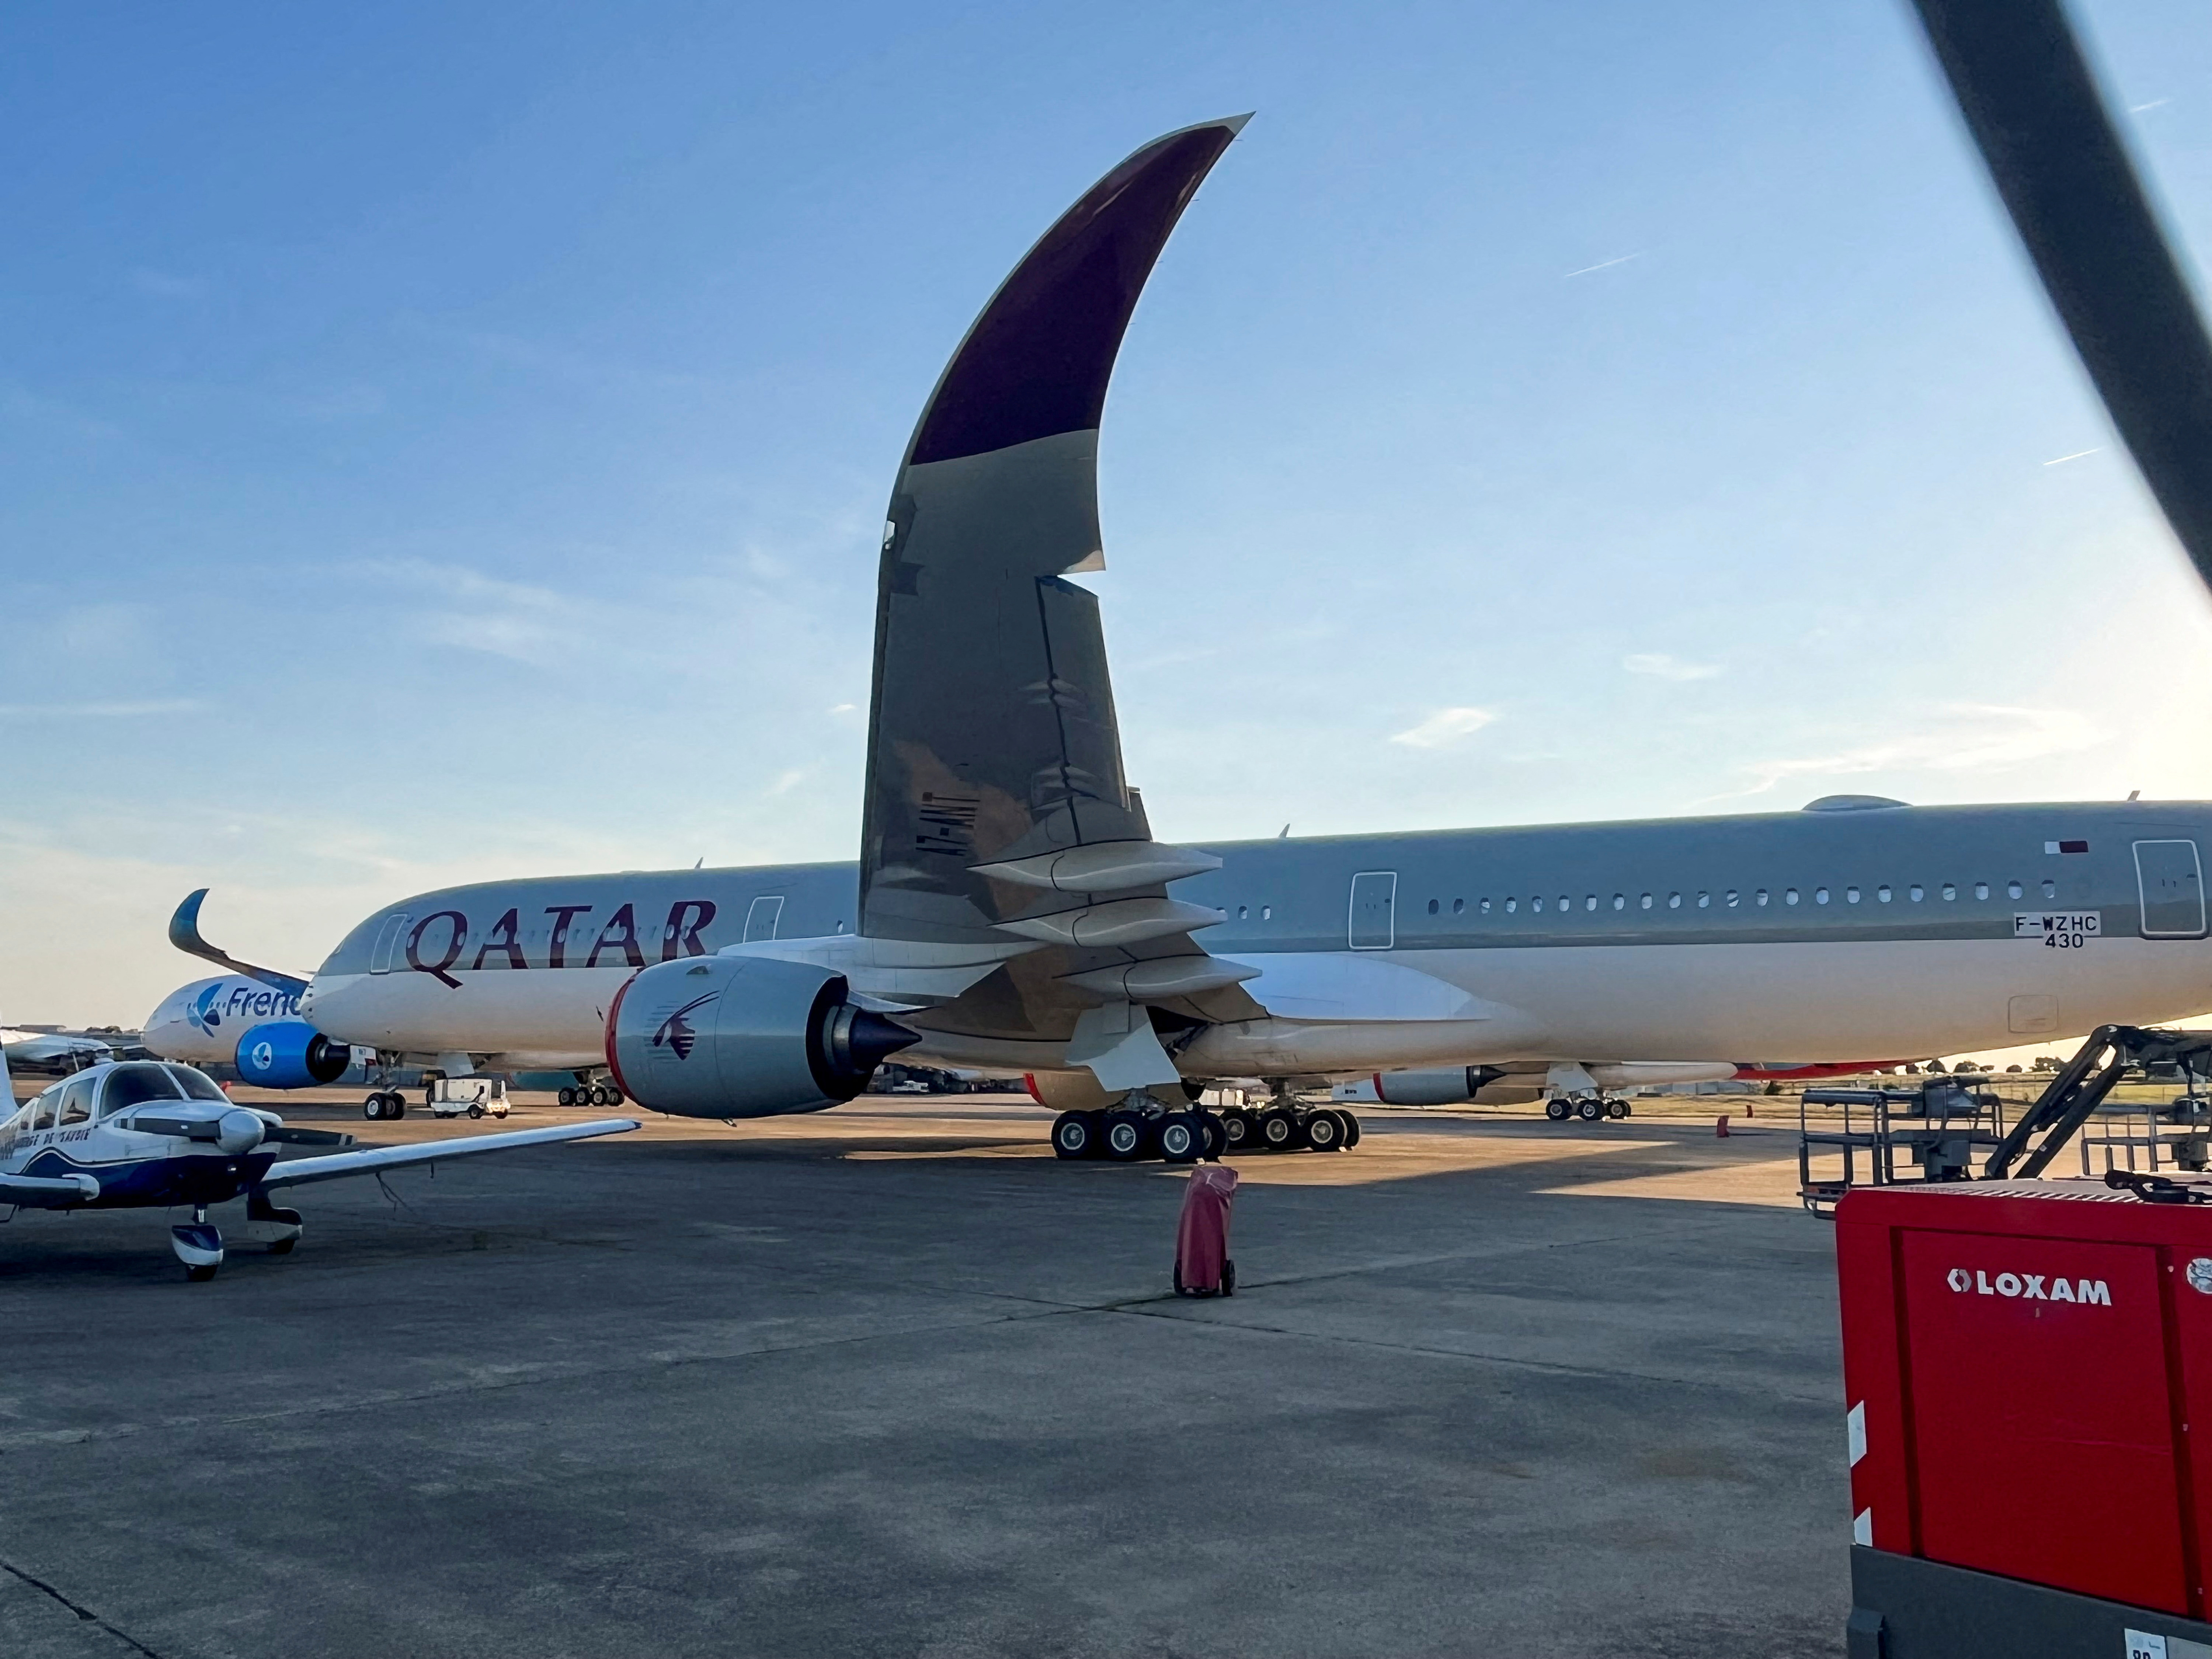 Airbus and the Gulf carrier remain locked in a contractual and safety dispute